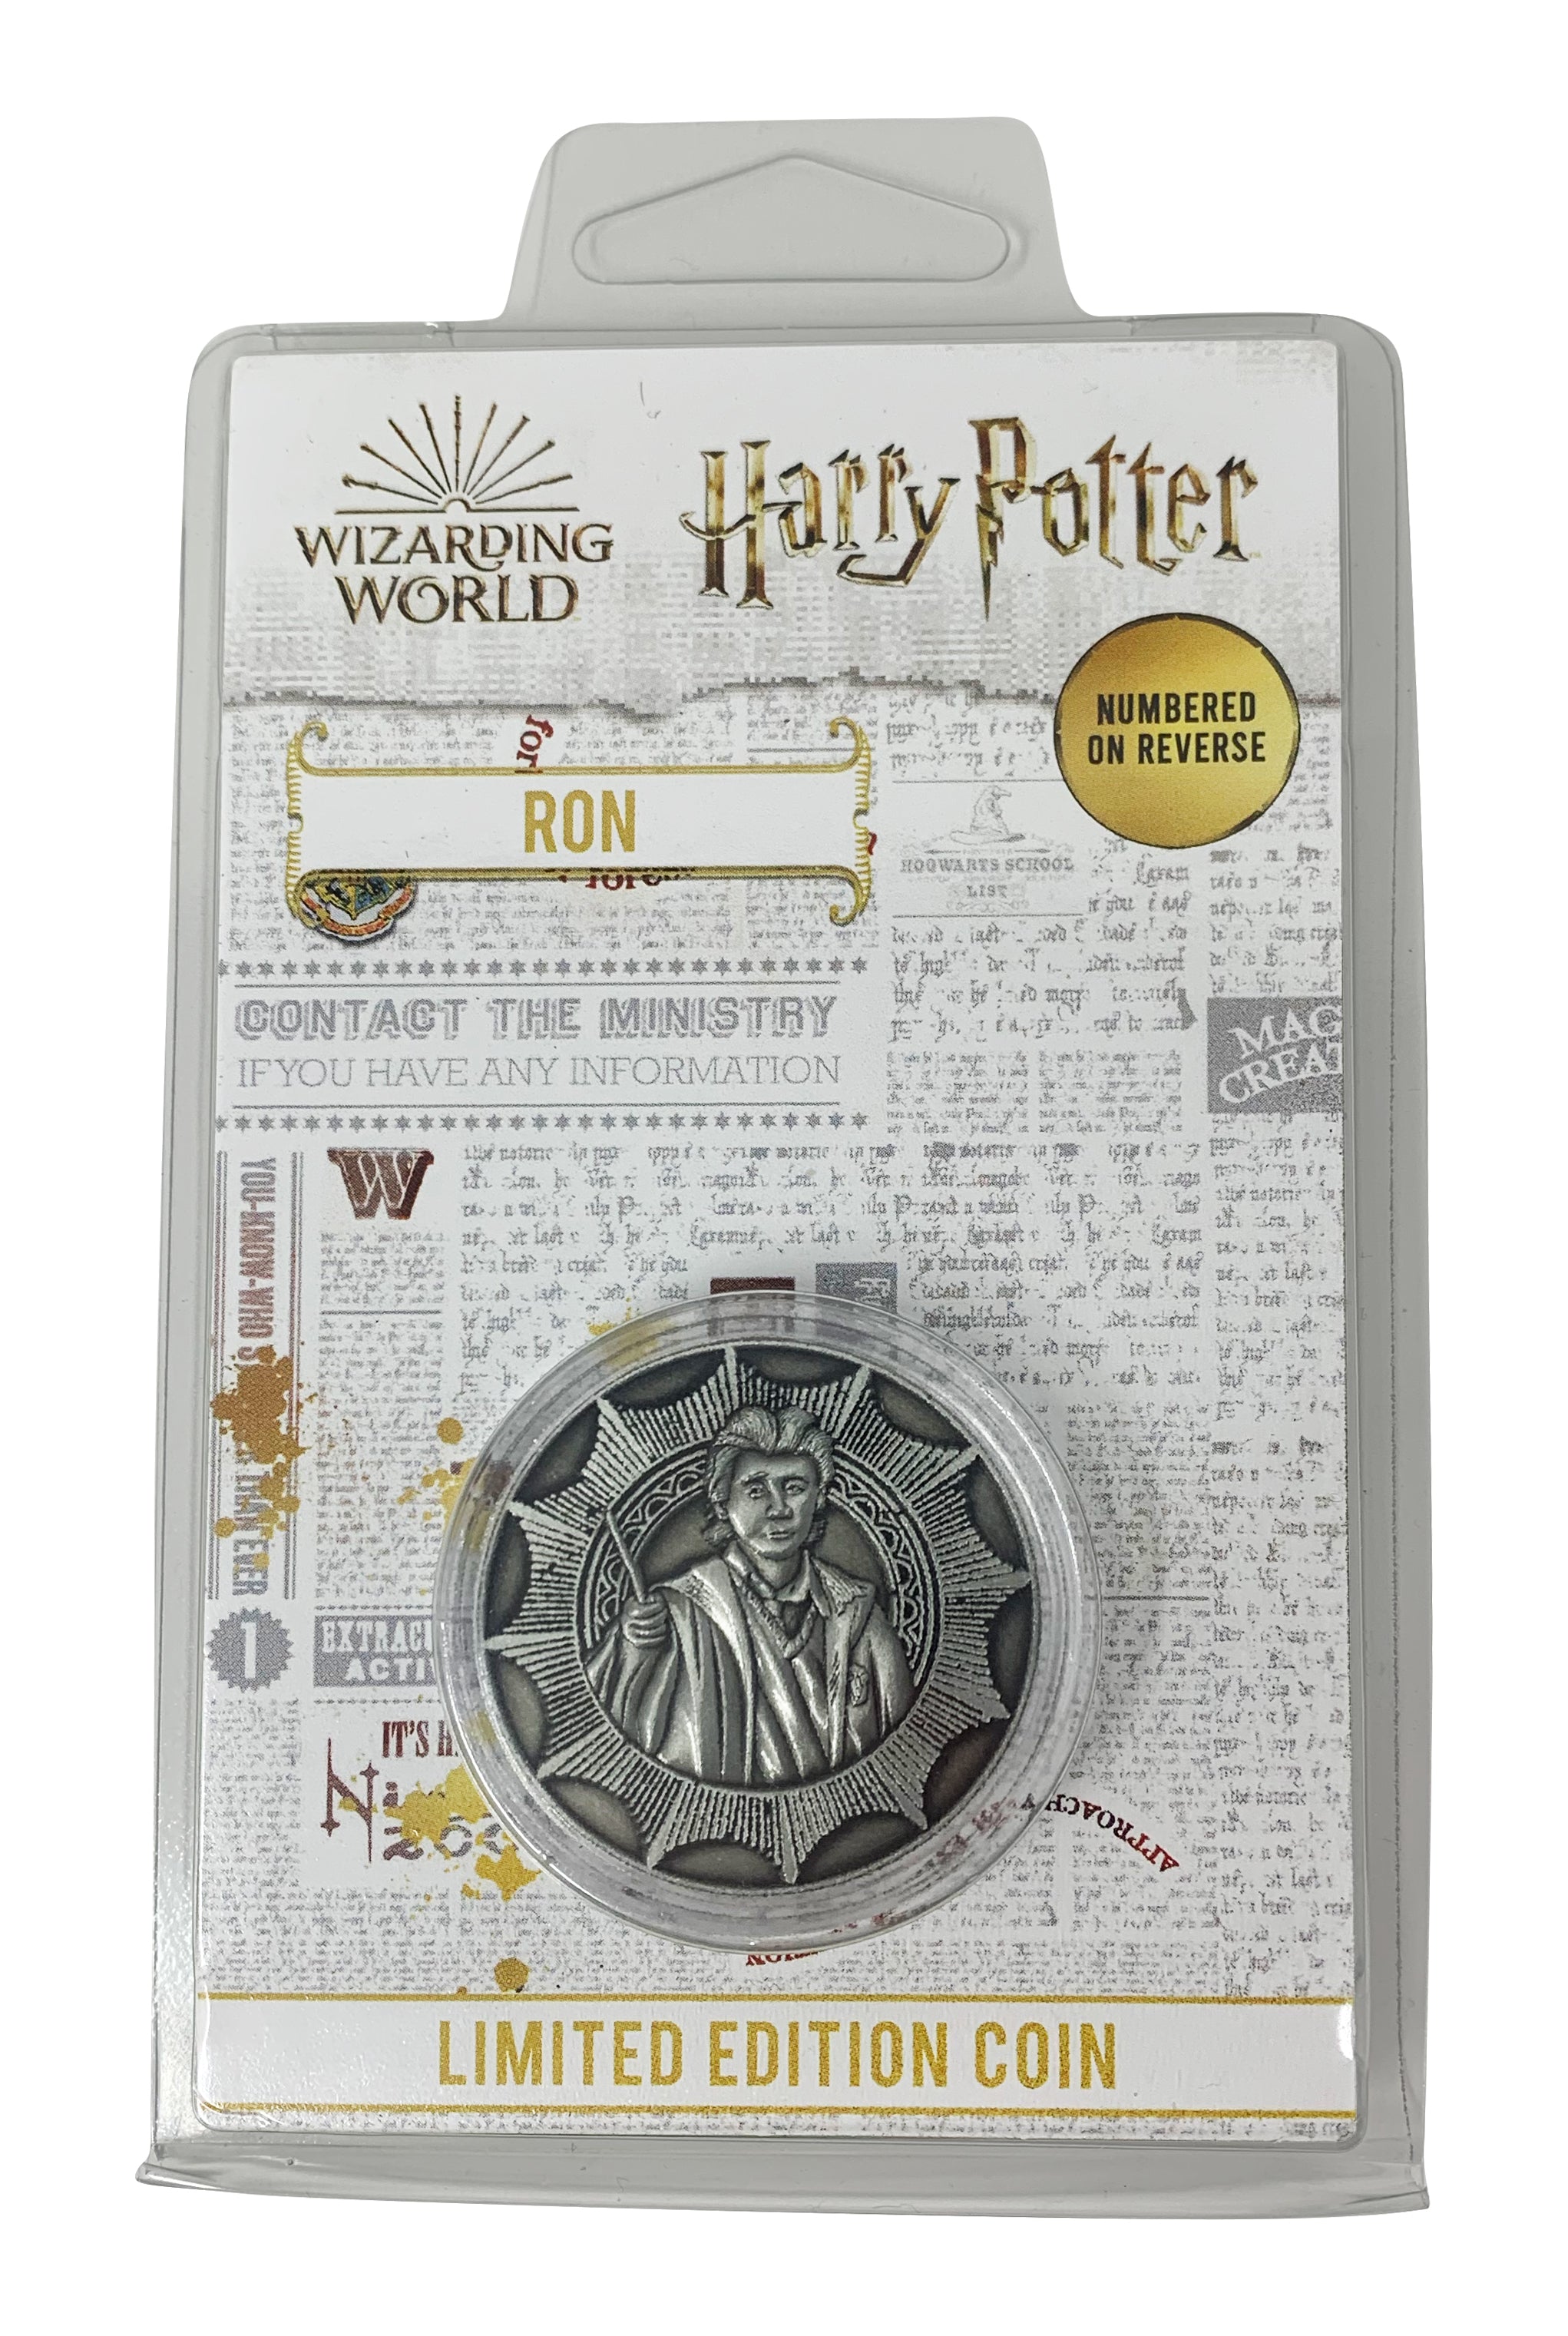 Harry Potter Limited Edition Coin - Ron